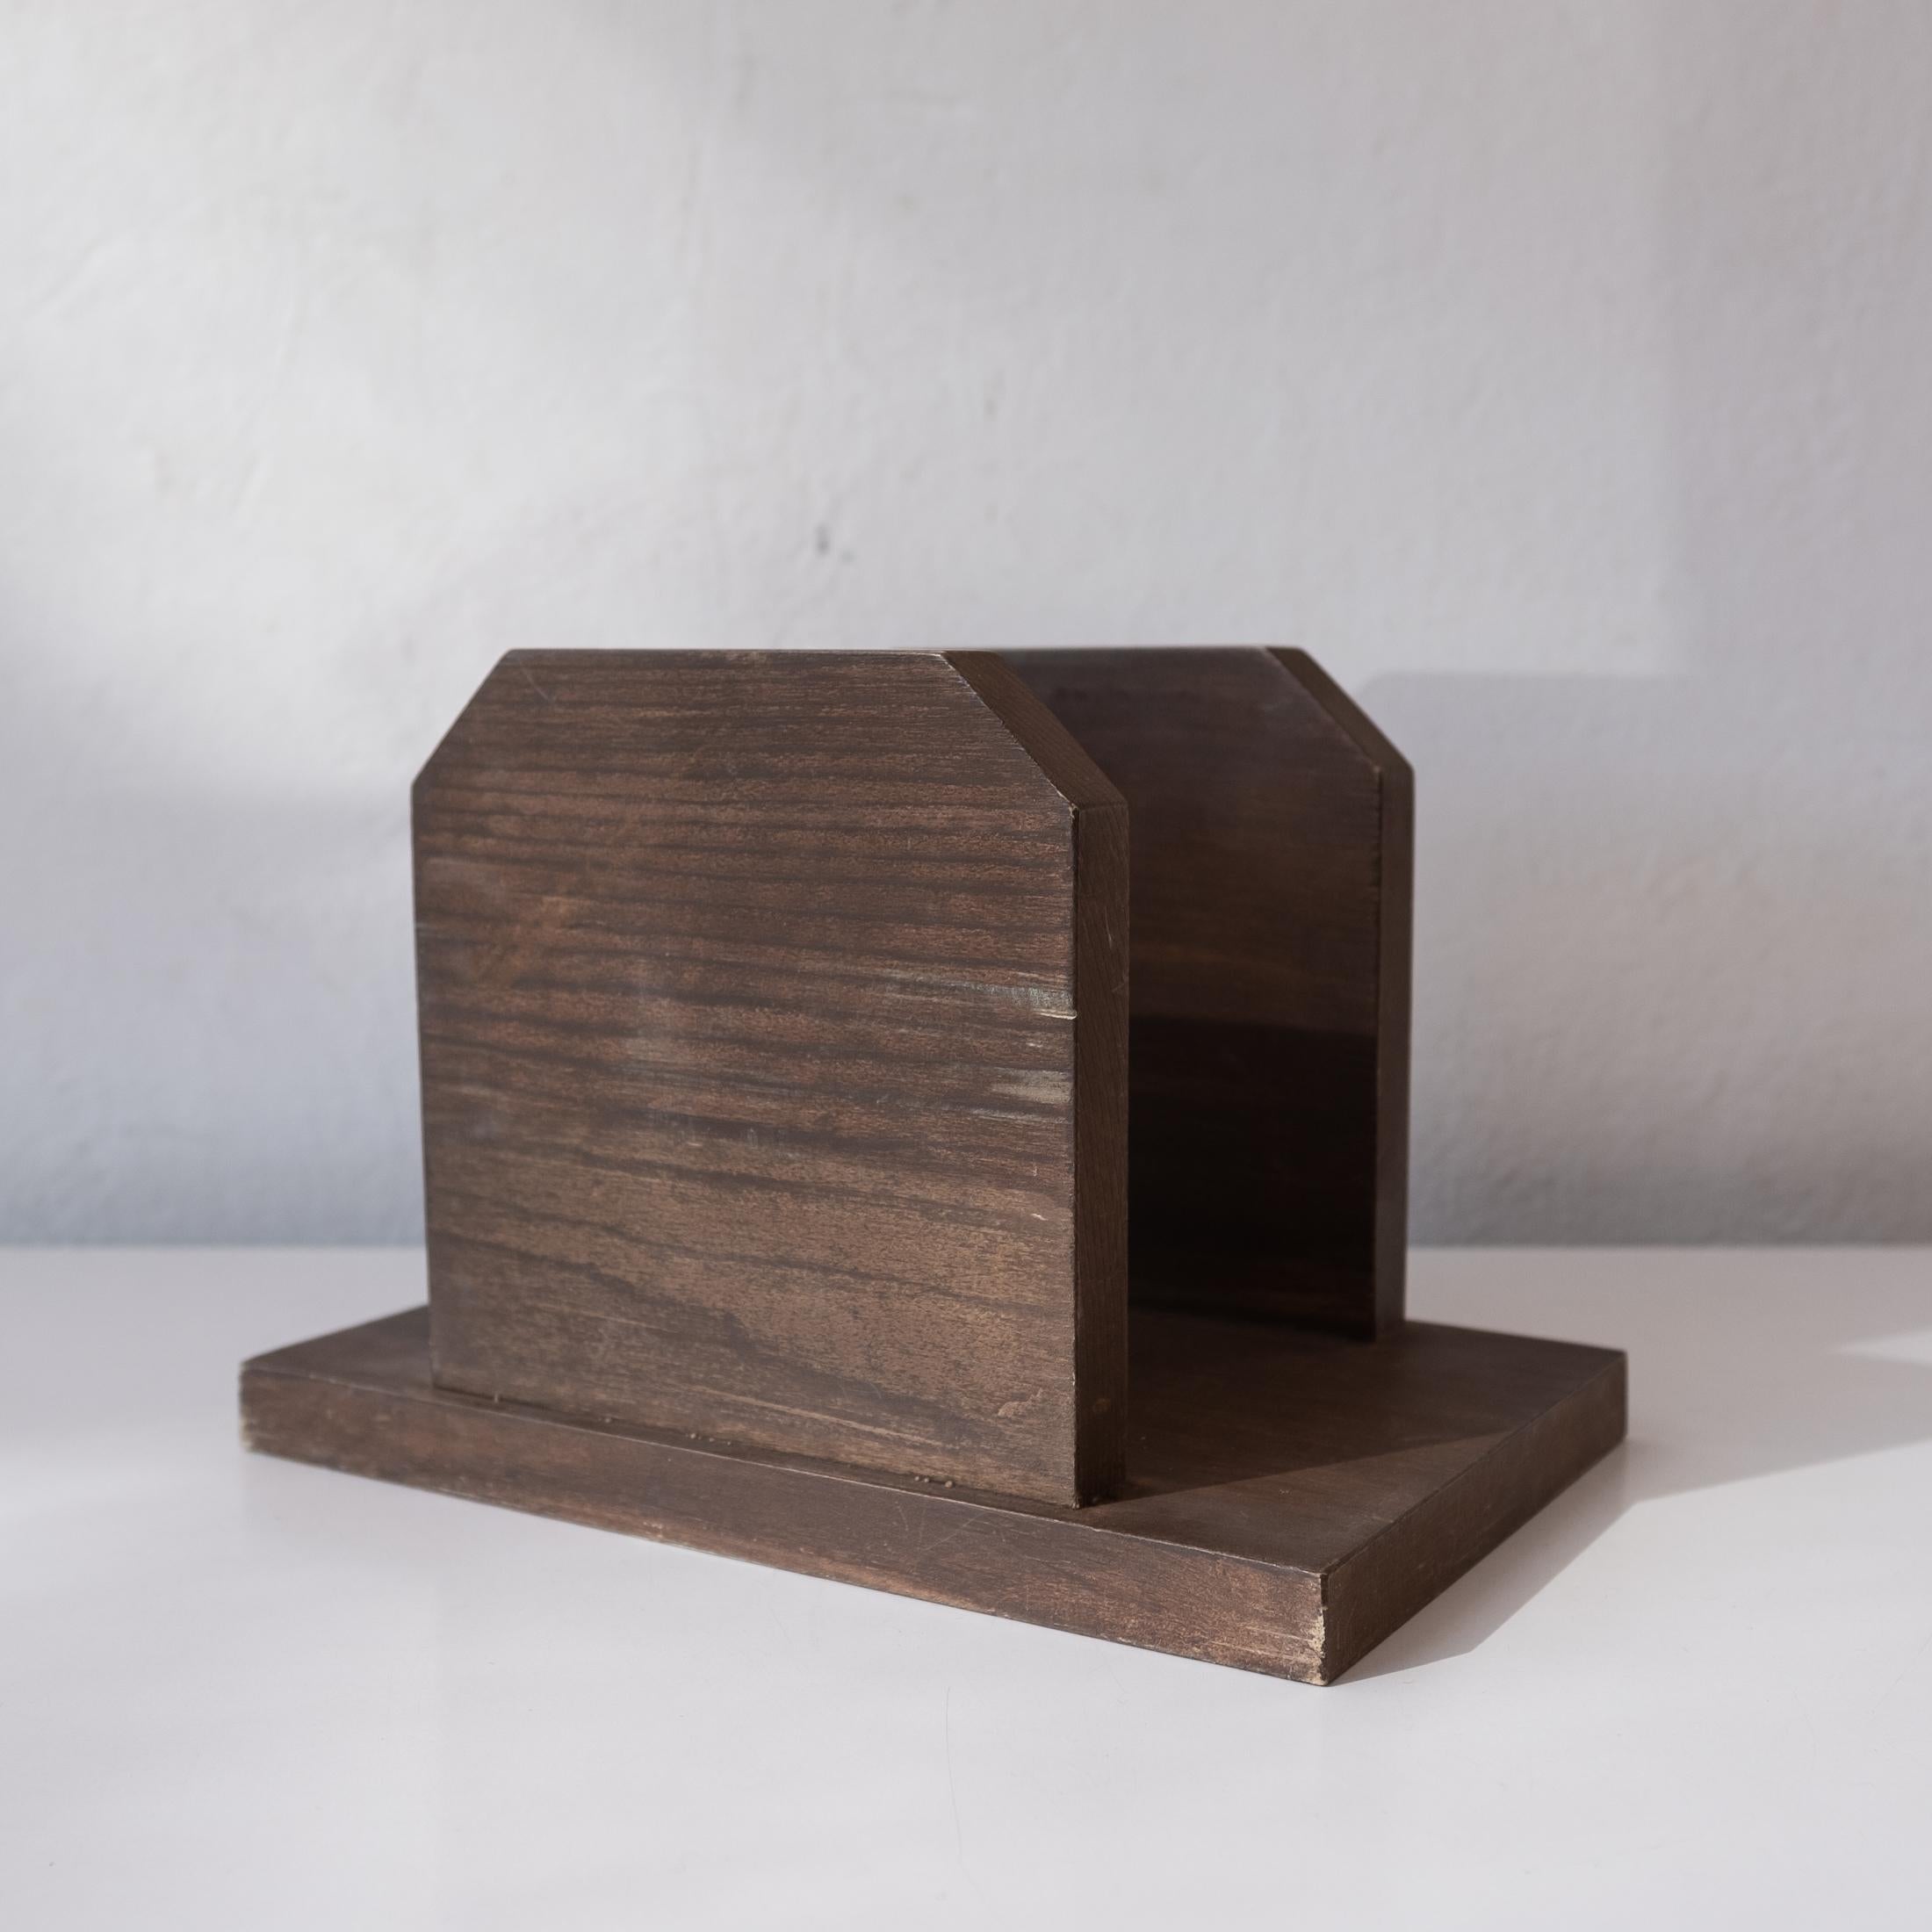 Desktop Book or Mail holder by John Lloyd Wright For Sale 3